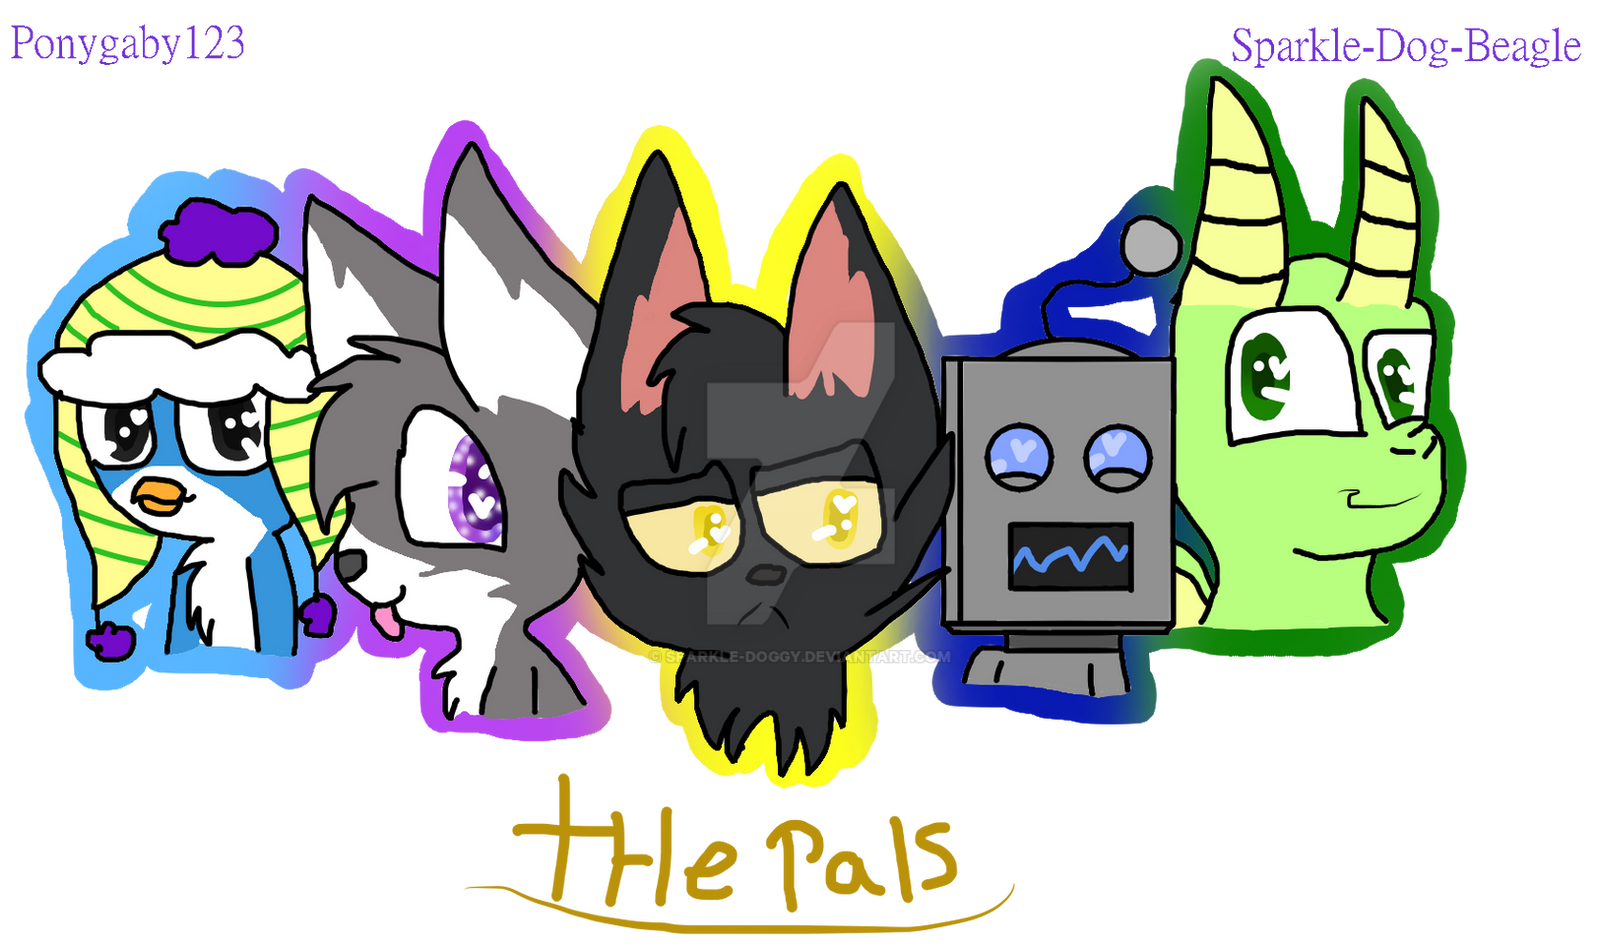 Roblox The Pals Pets Eew By Sparkle Doggy On Deviantart - the pals roblox pets